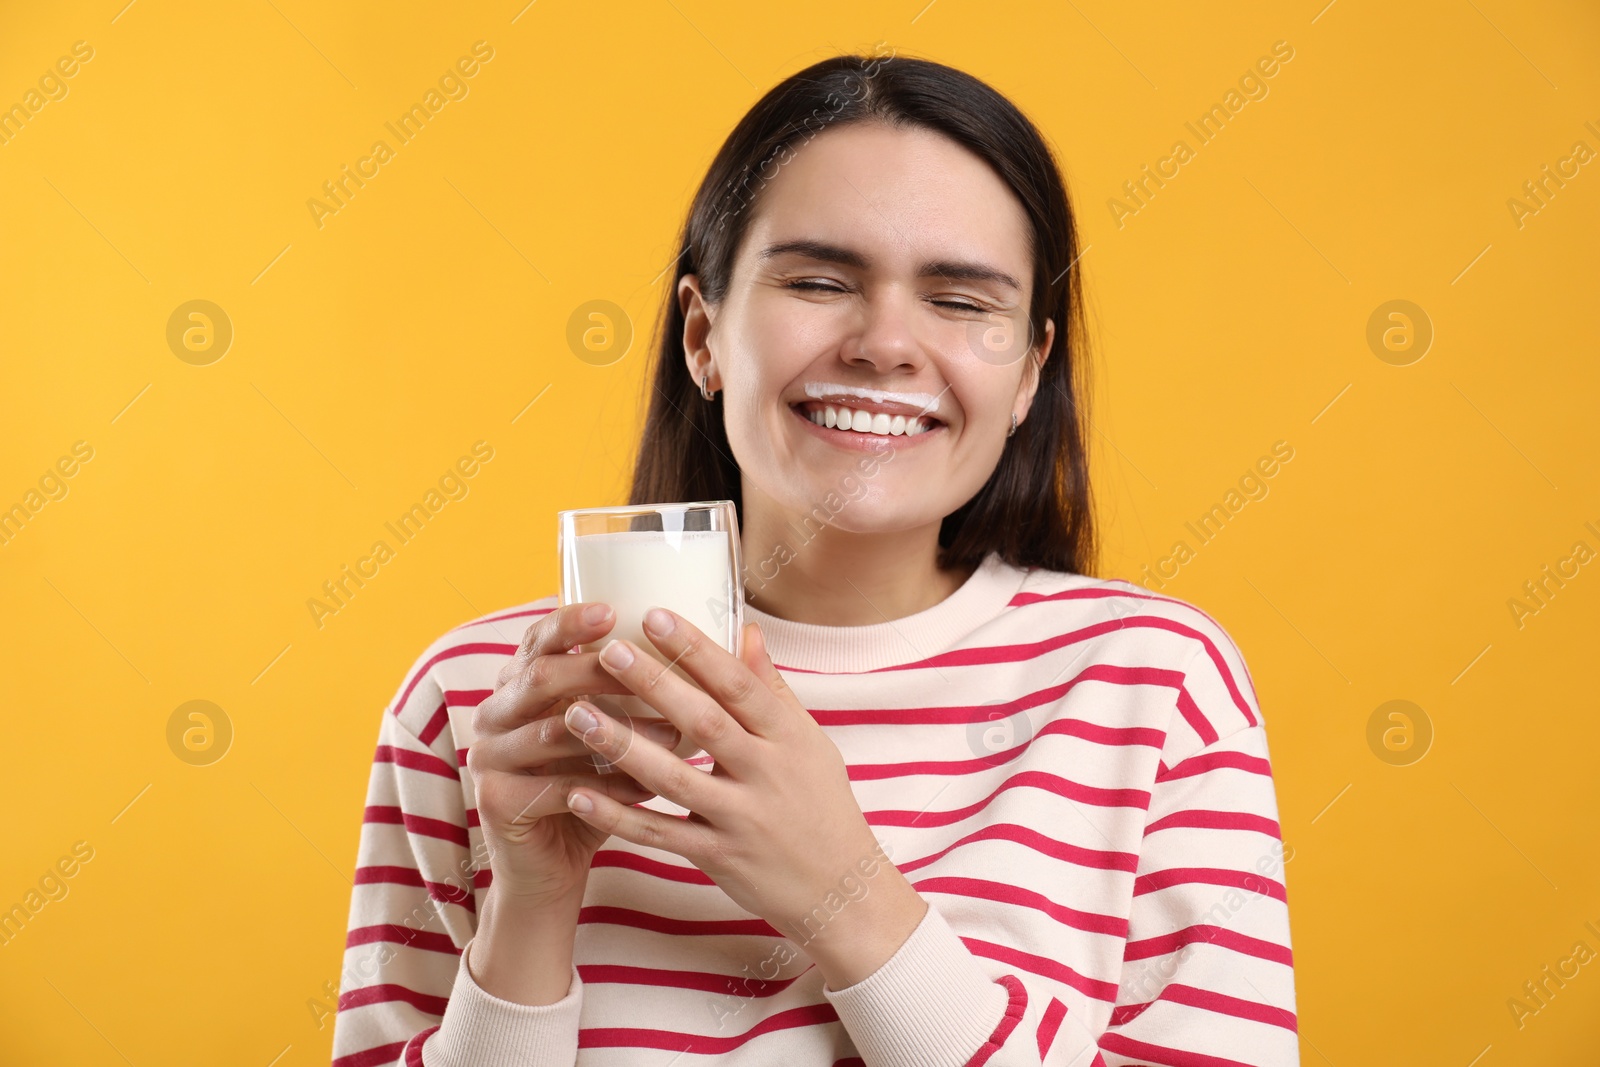 Photo of Happy woman with milk mustache holding glass of tasty dairy drink on yellow background